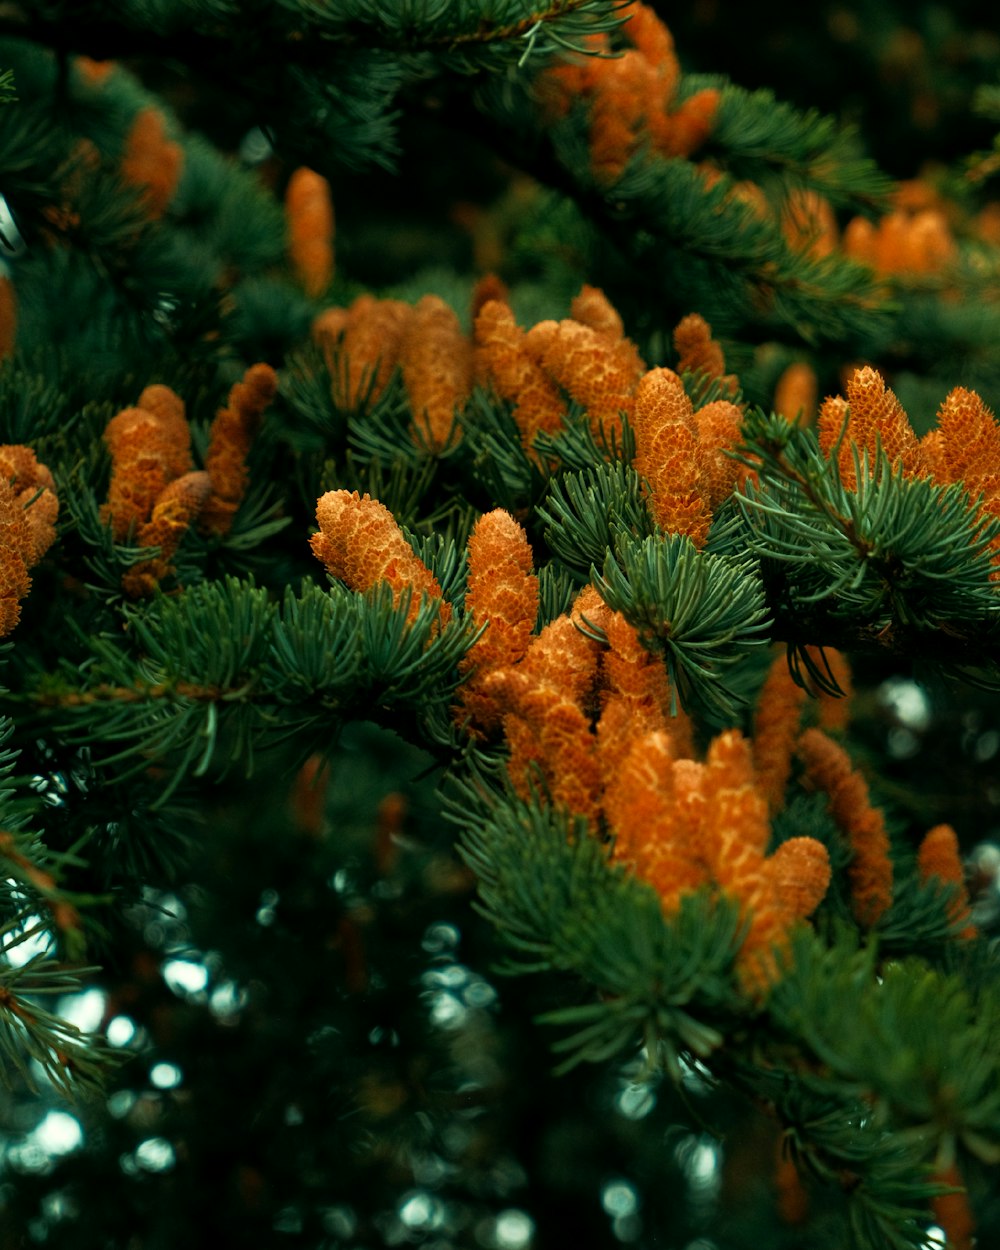 a close up of a pine tree with orange cones